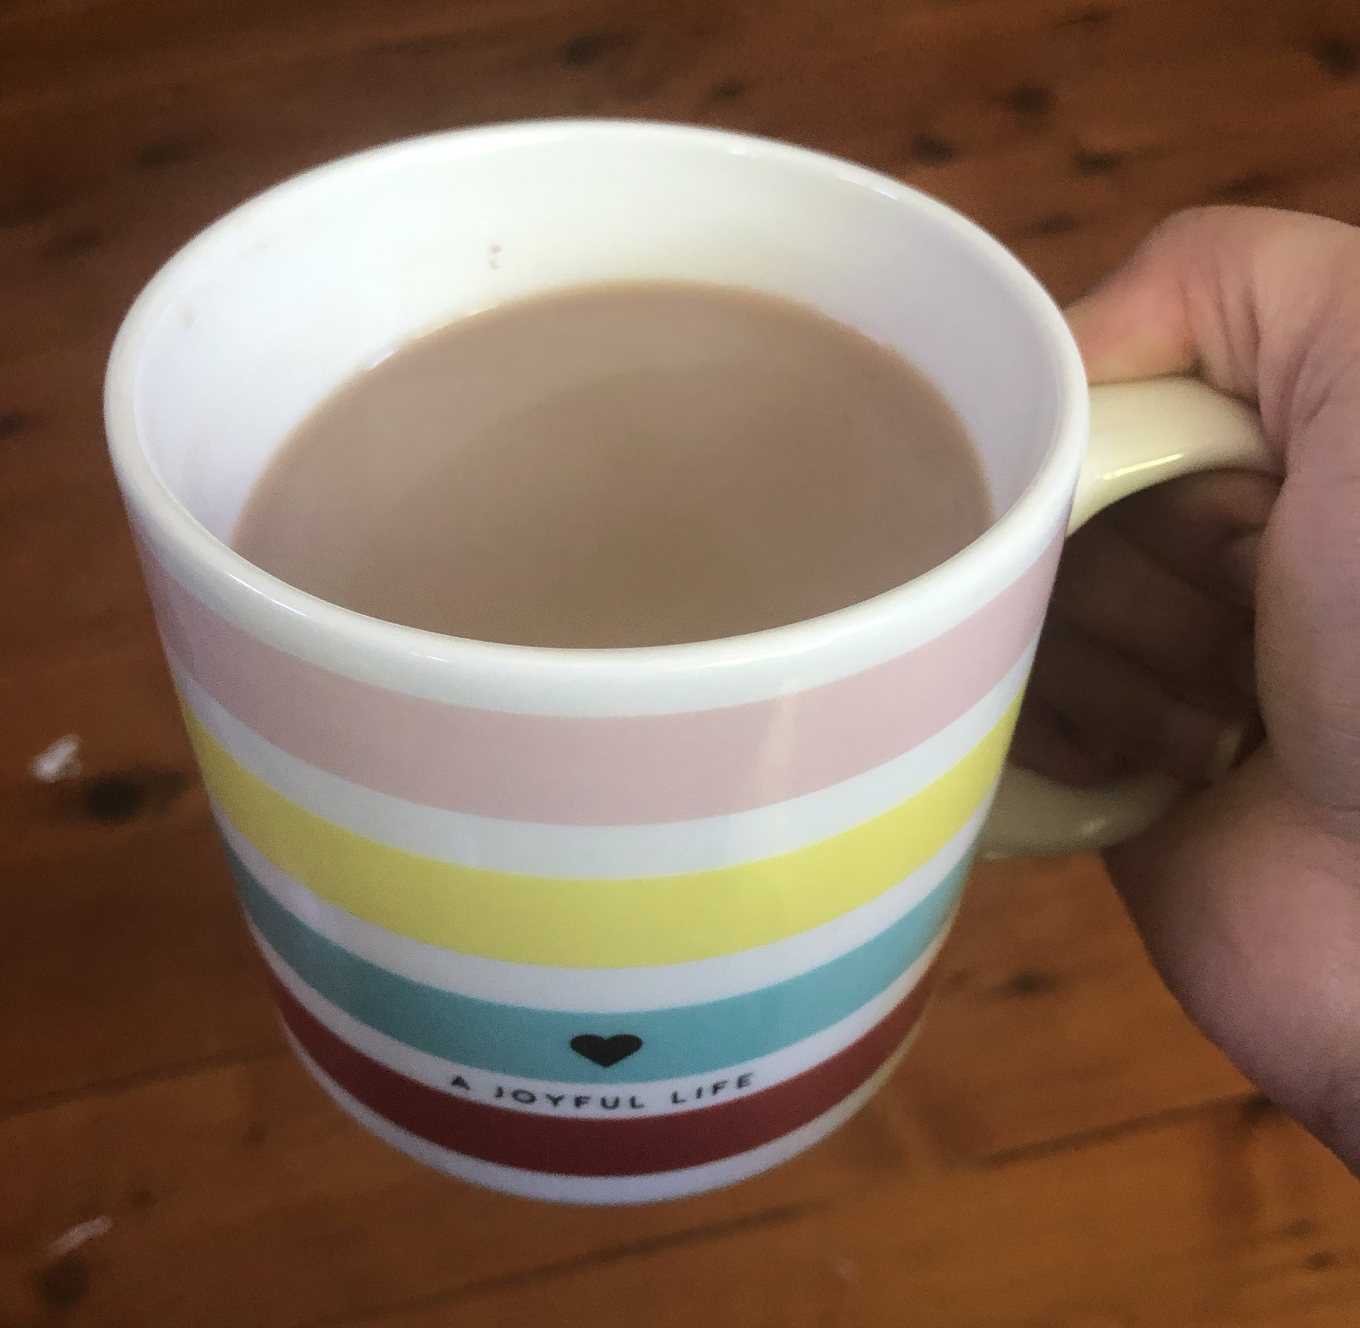 A hand holding a mug of weak and watery Milo